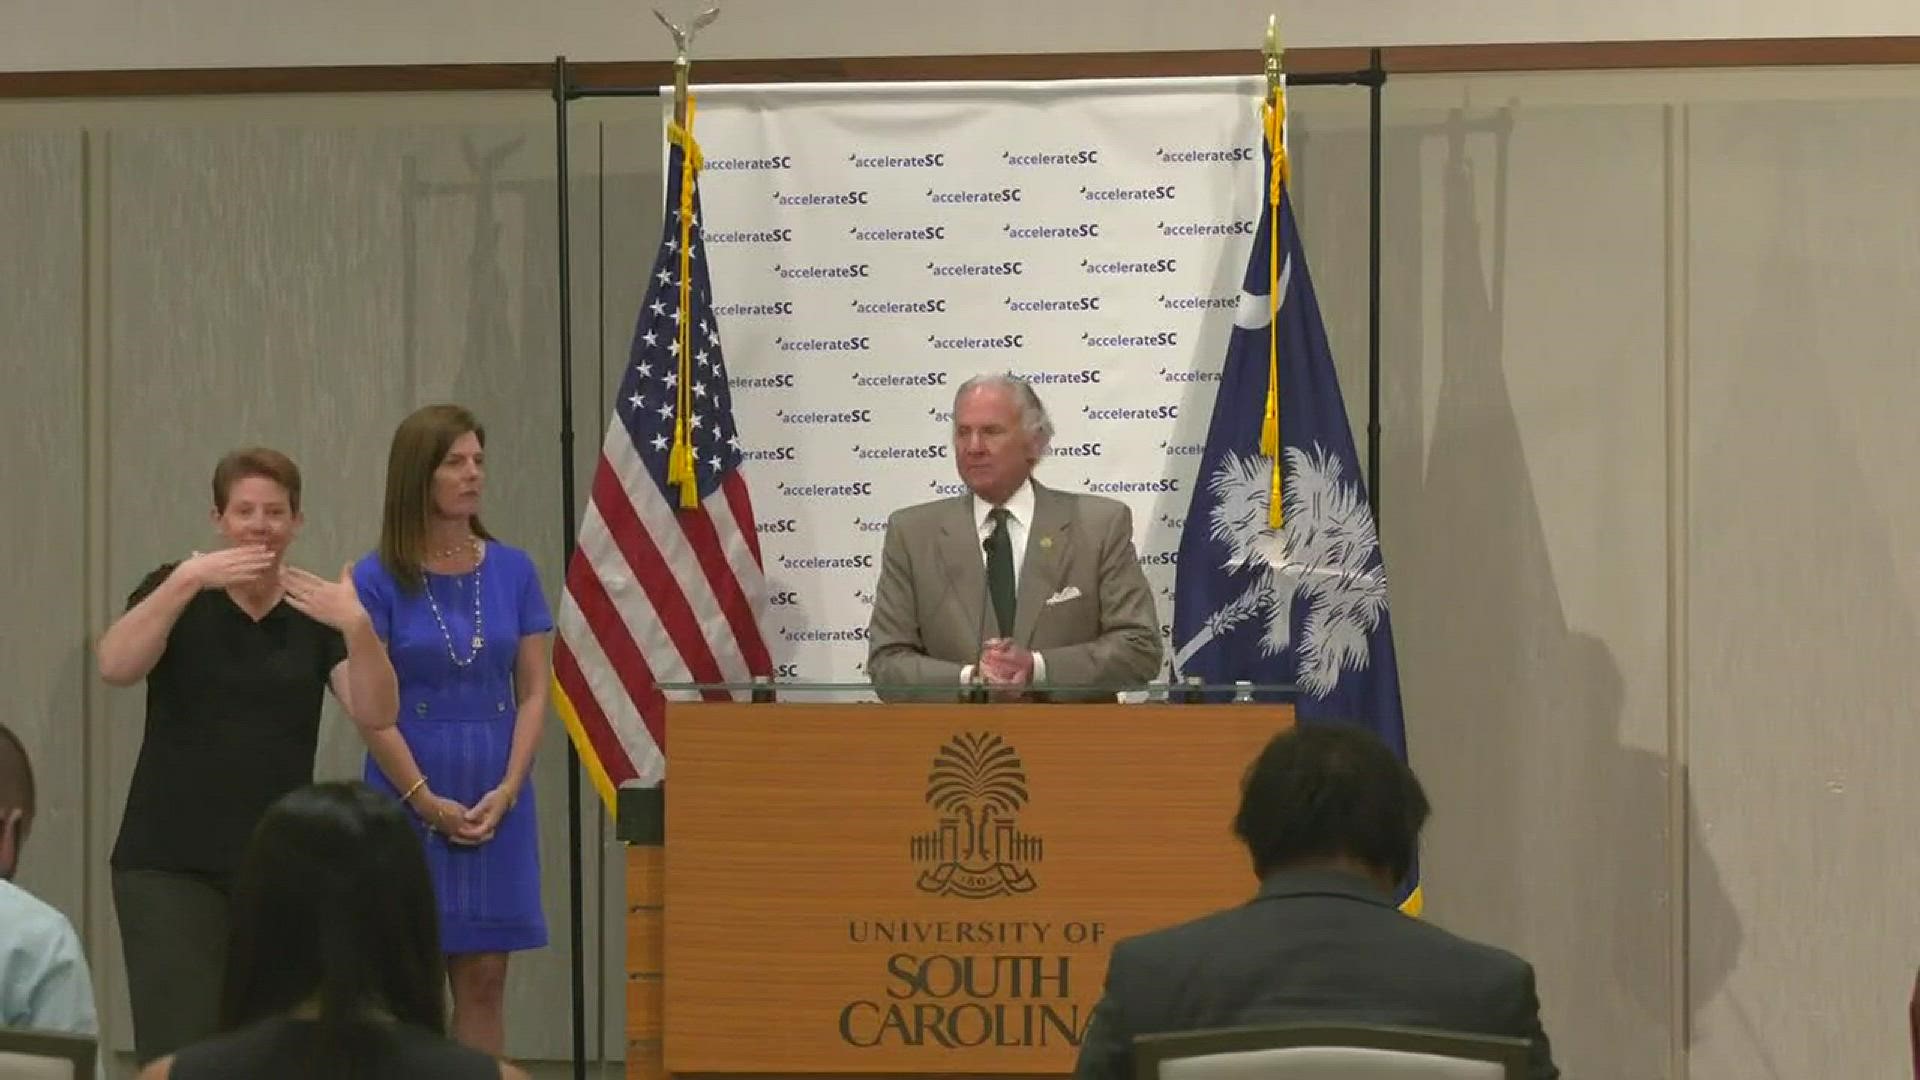 Gov. Henry McMaster took questions about South Carolina's effort to reopen the state quickly and safely.